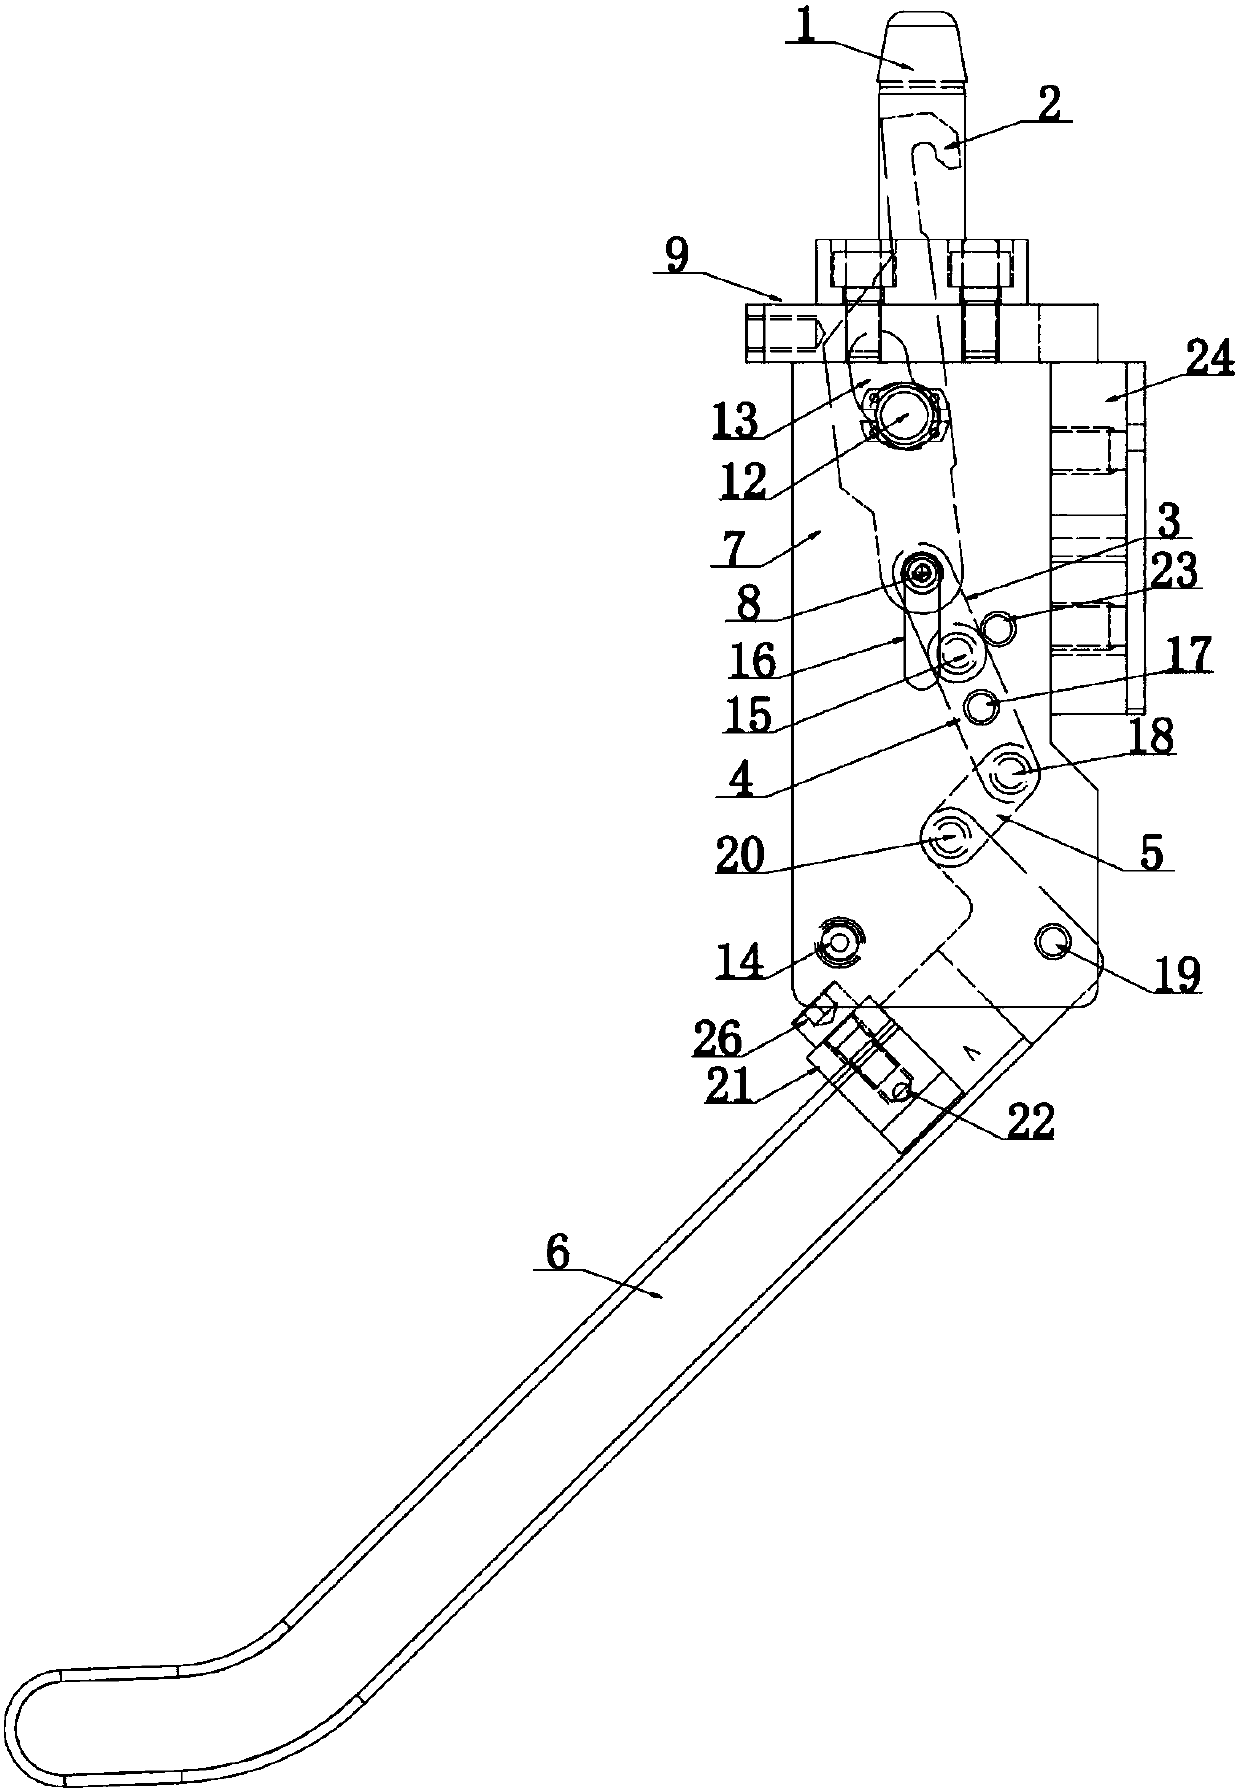 Manual positioning and compressing self-locking mechanism for track trolley